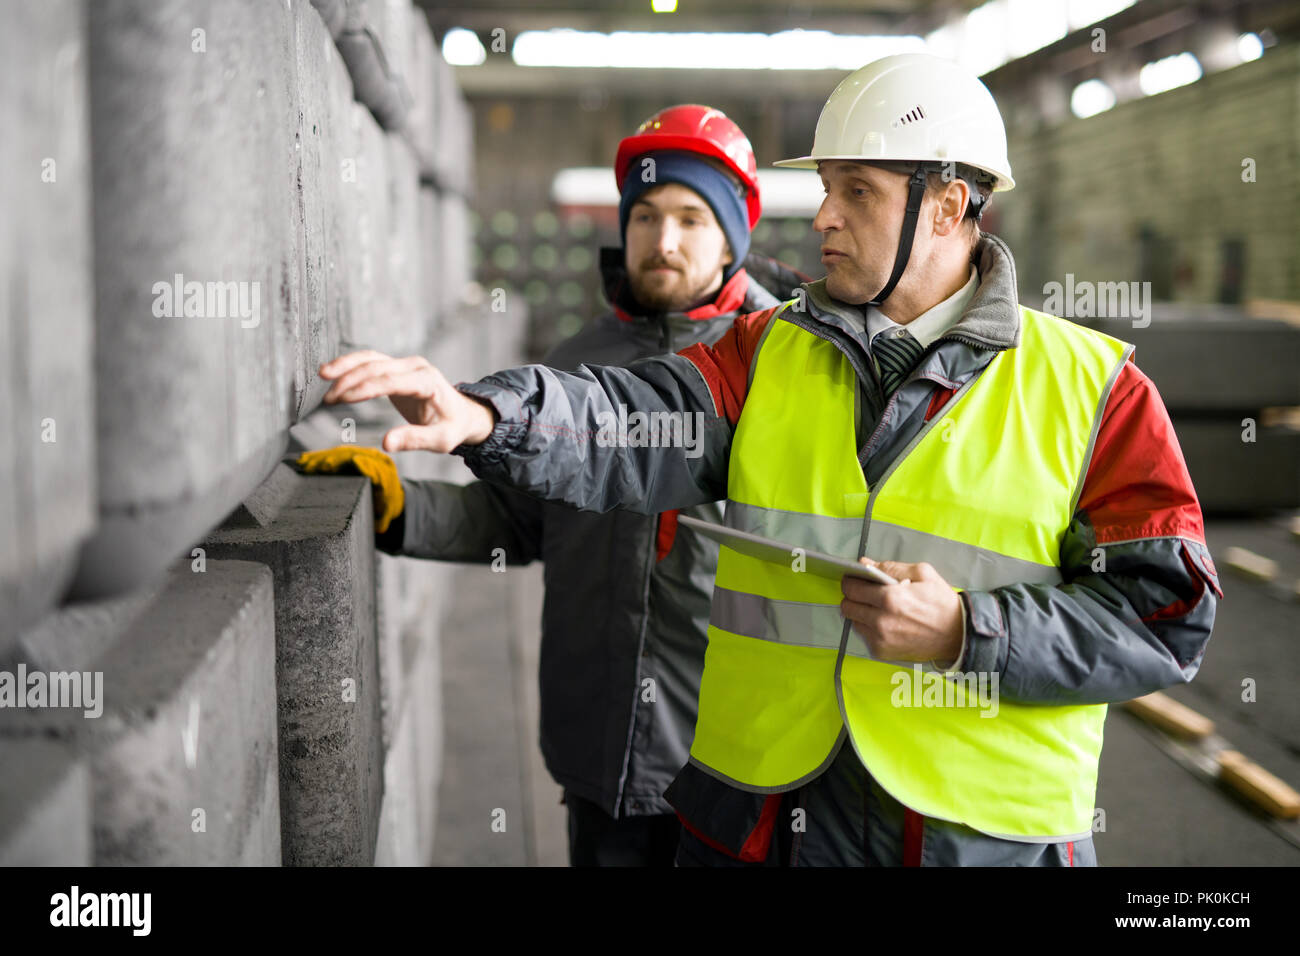 Two Workers at Industrial Plant Stock Photo